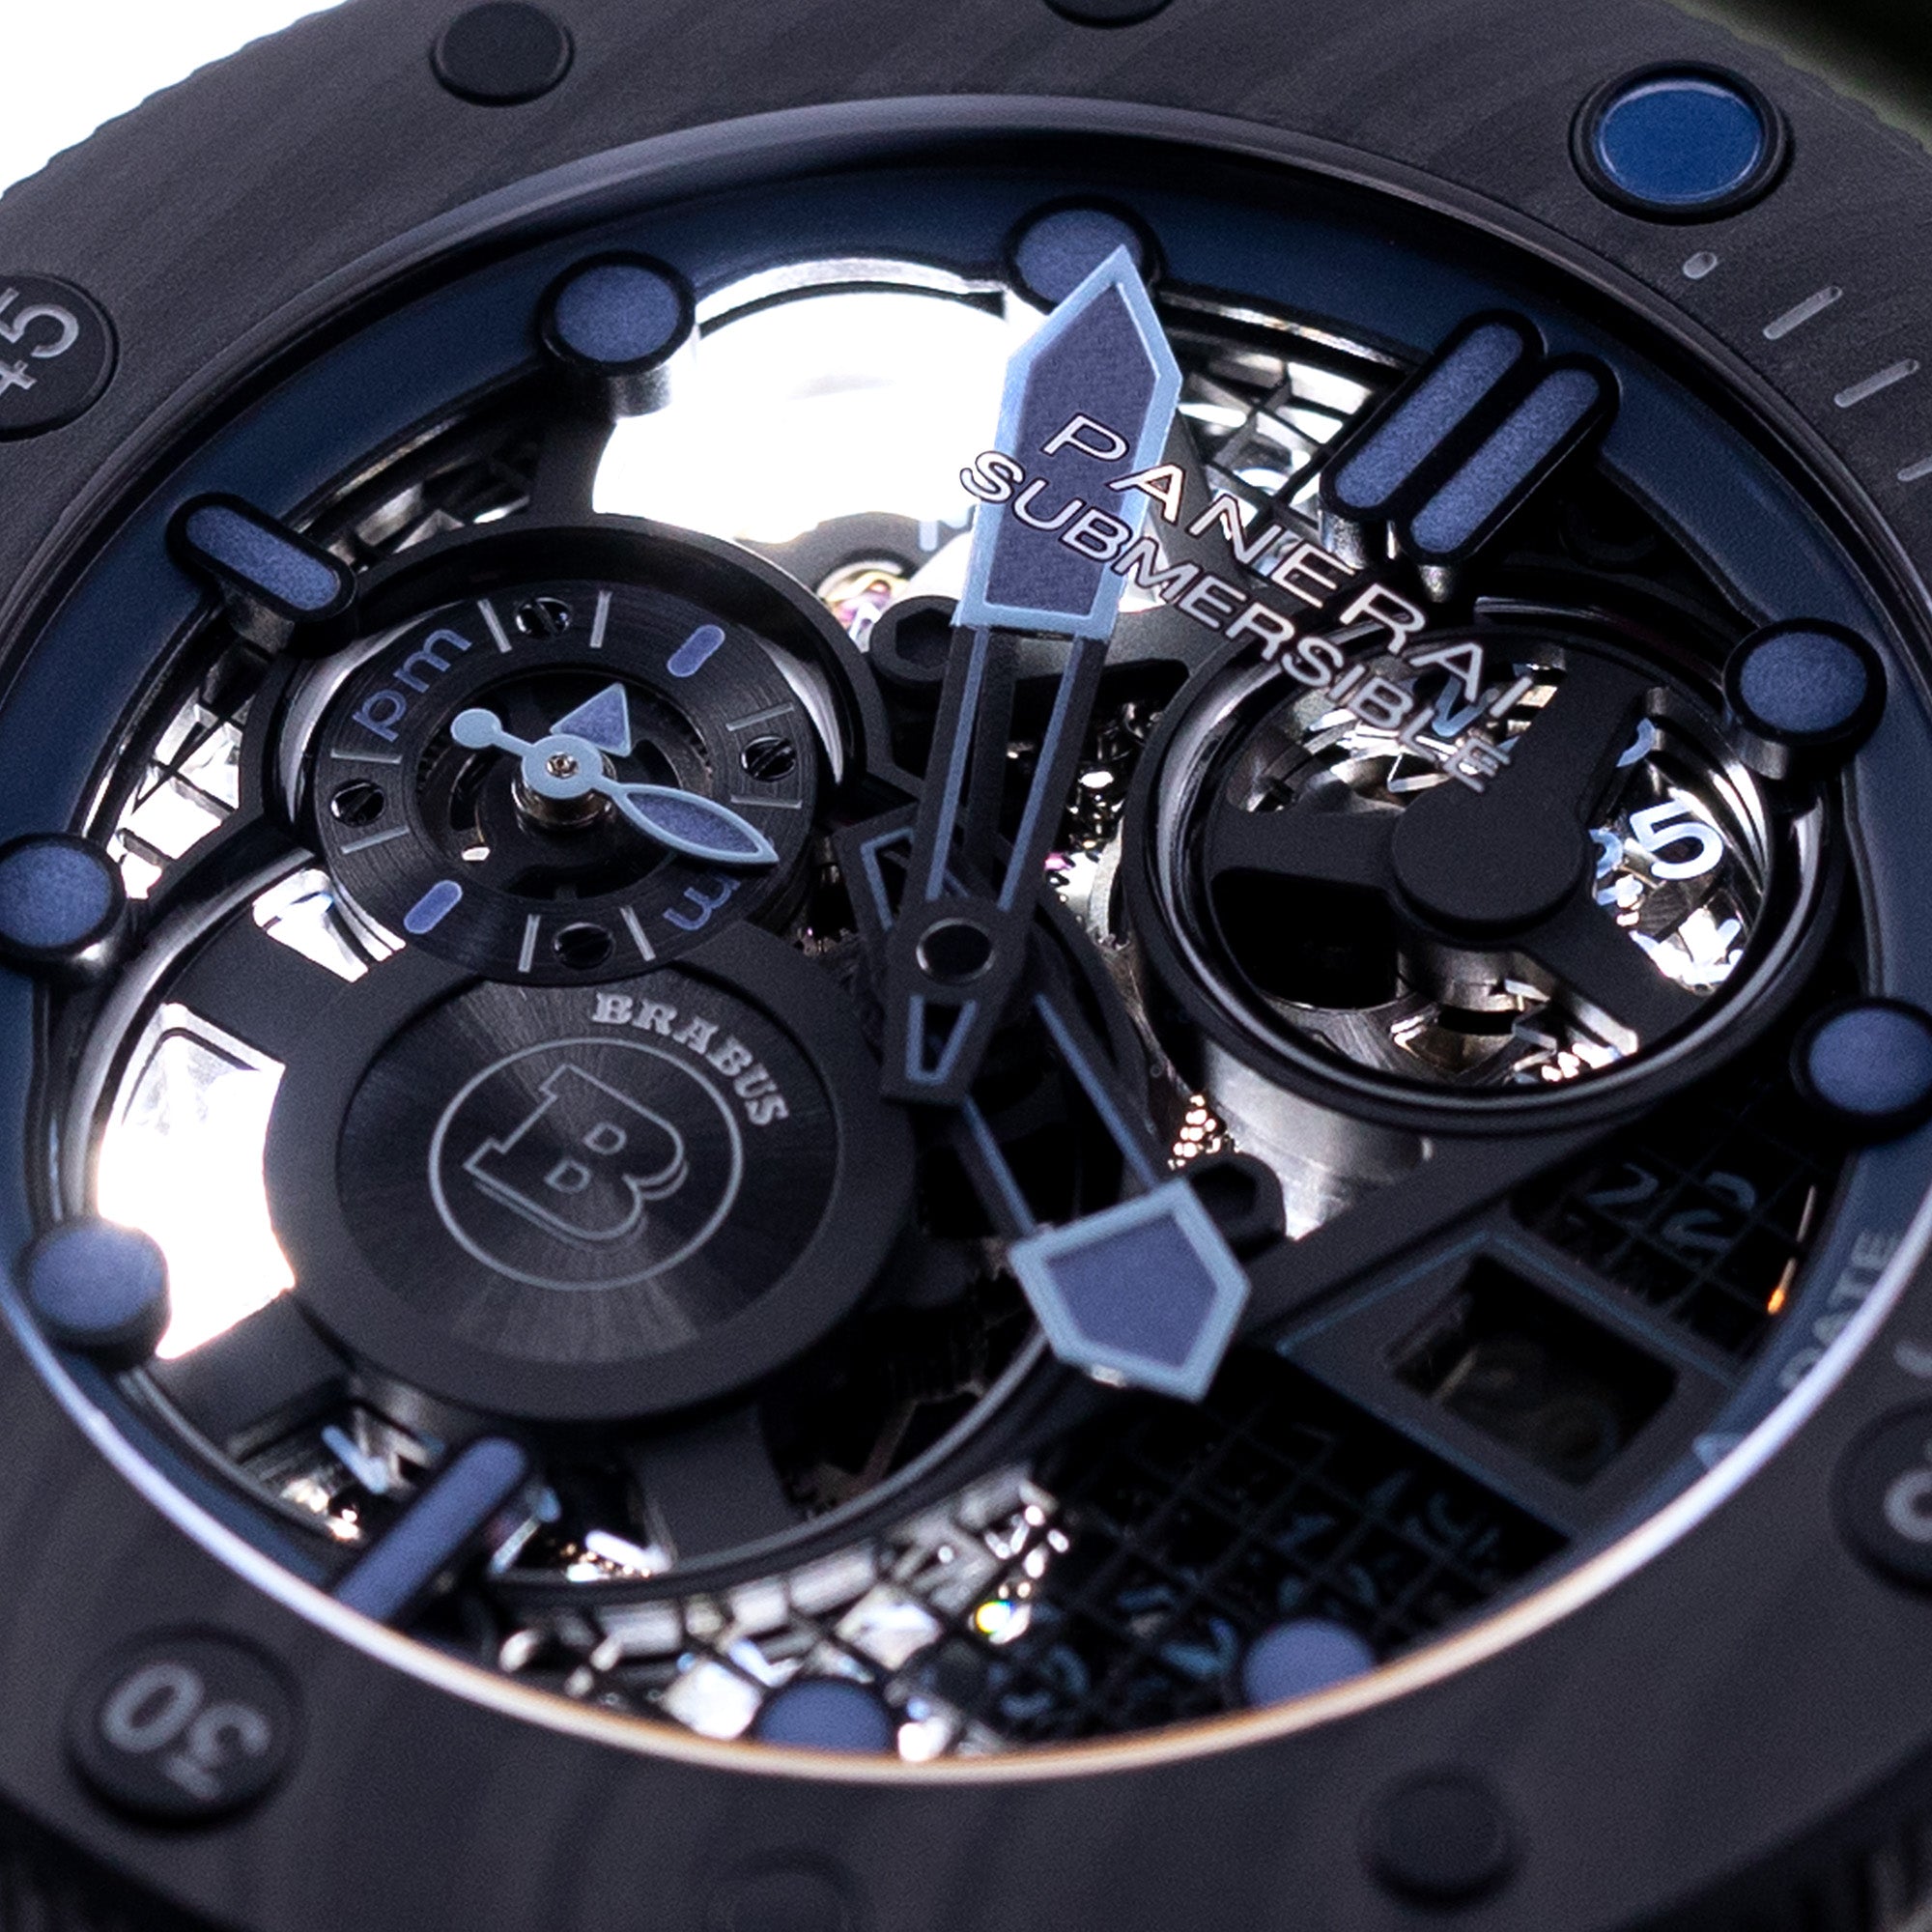 Panerai Submersible S Brabus Editions first-ever skeletonized automatic movement 